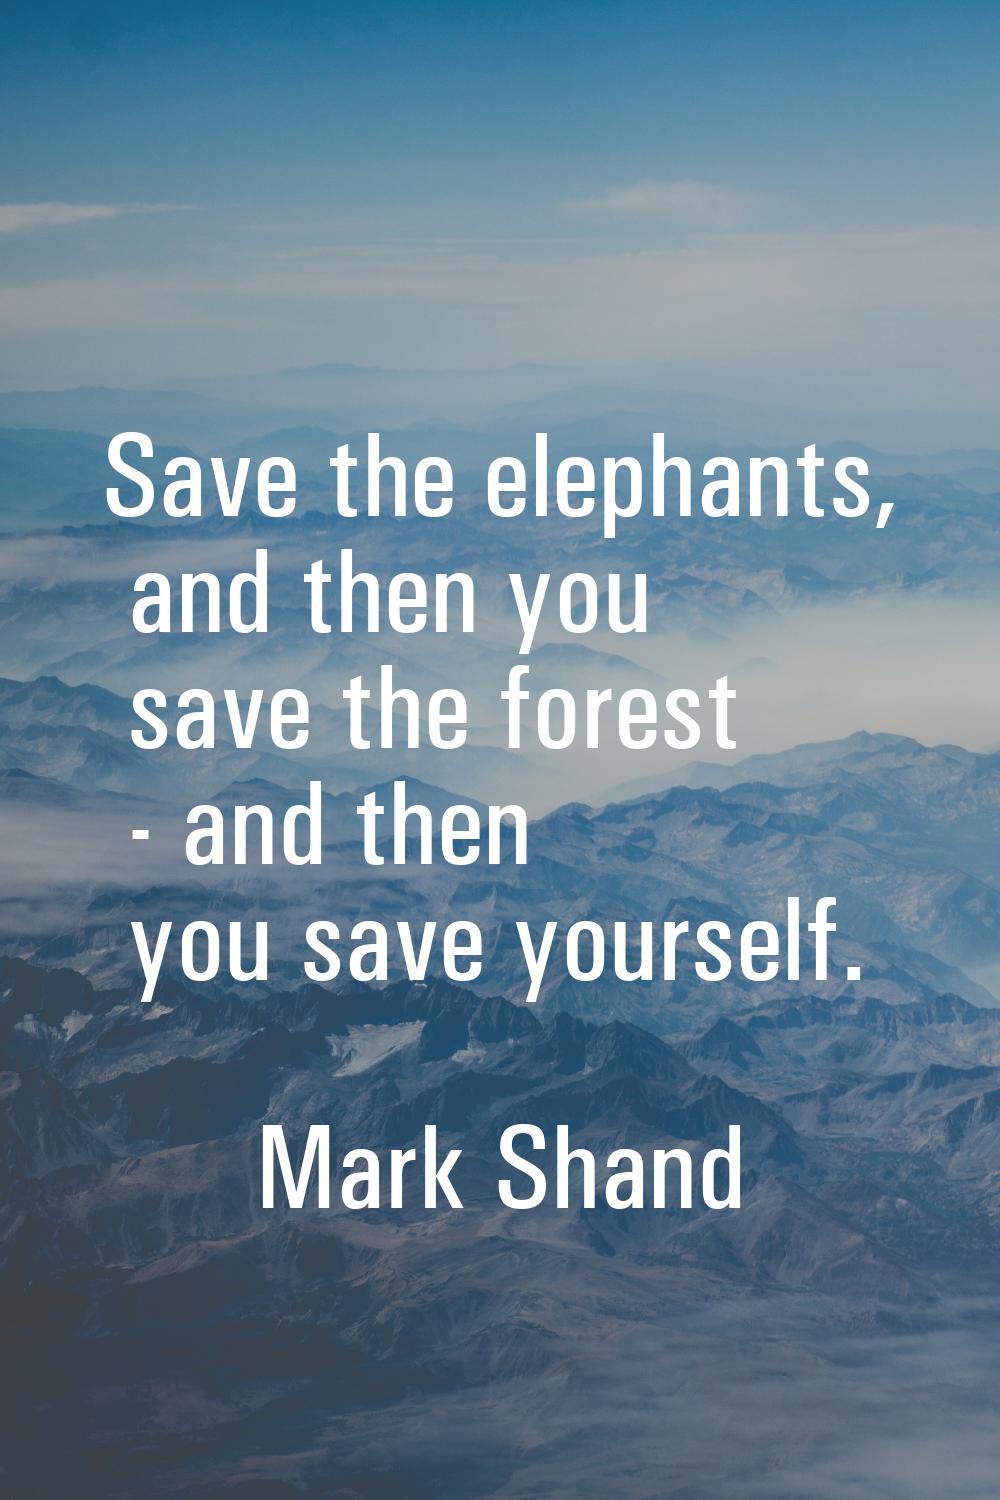 Save the elephants, and then you save the forest - and then you save yourself.